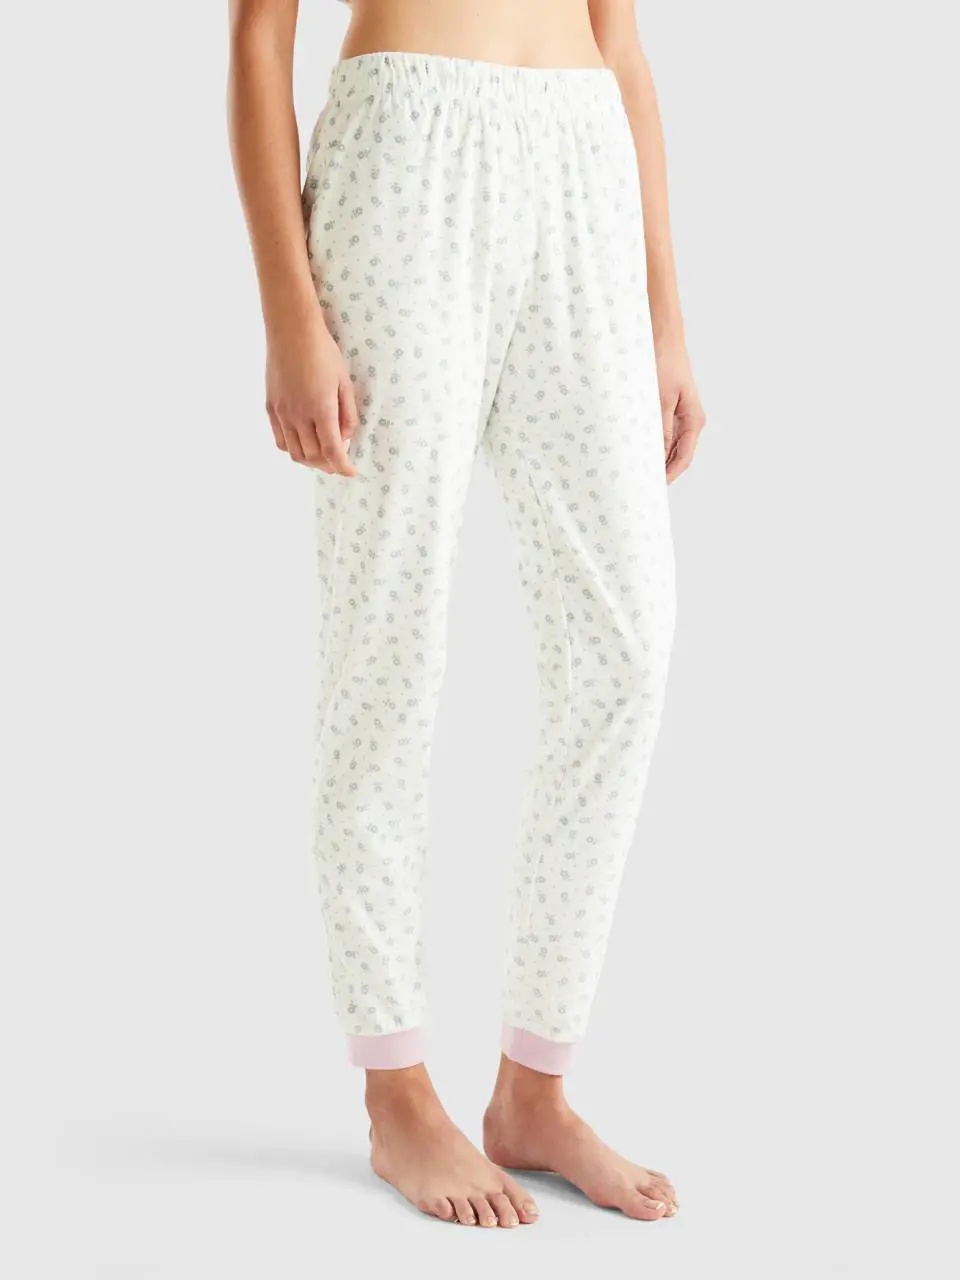 Benetton slim fit floral trousers. 1